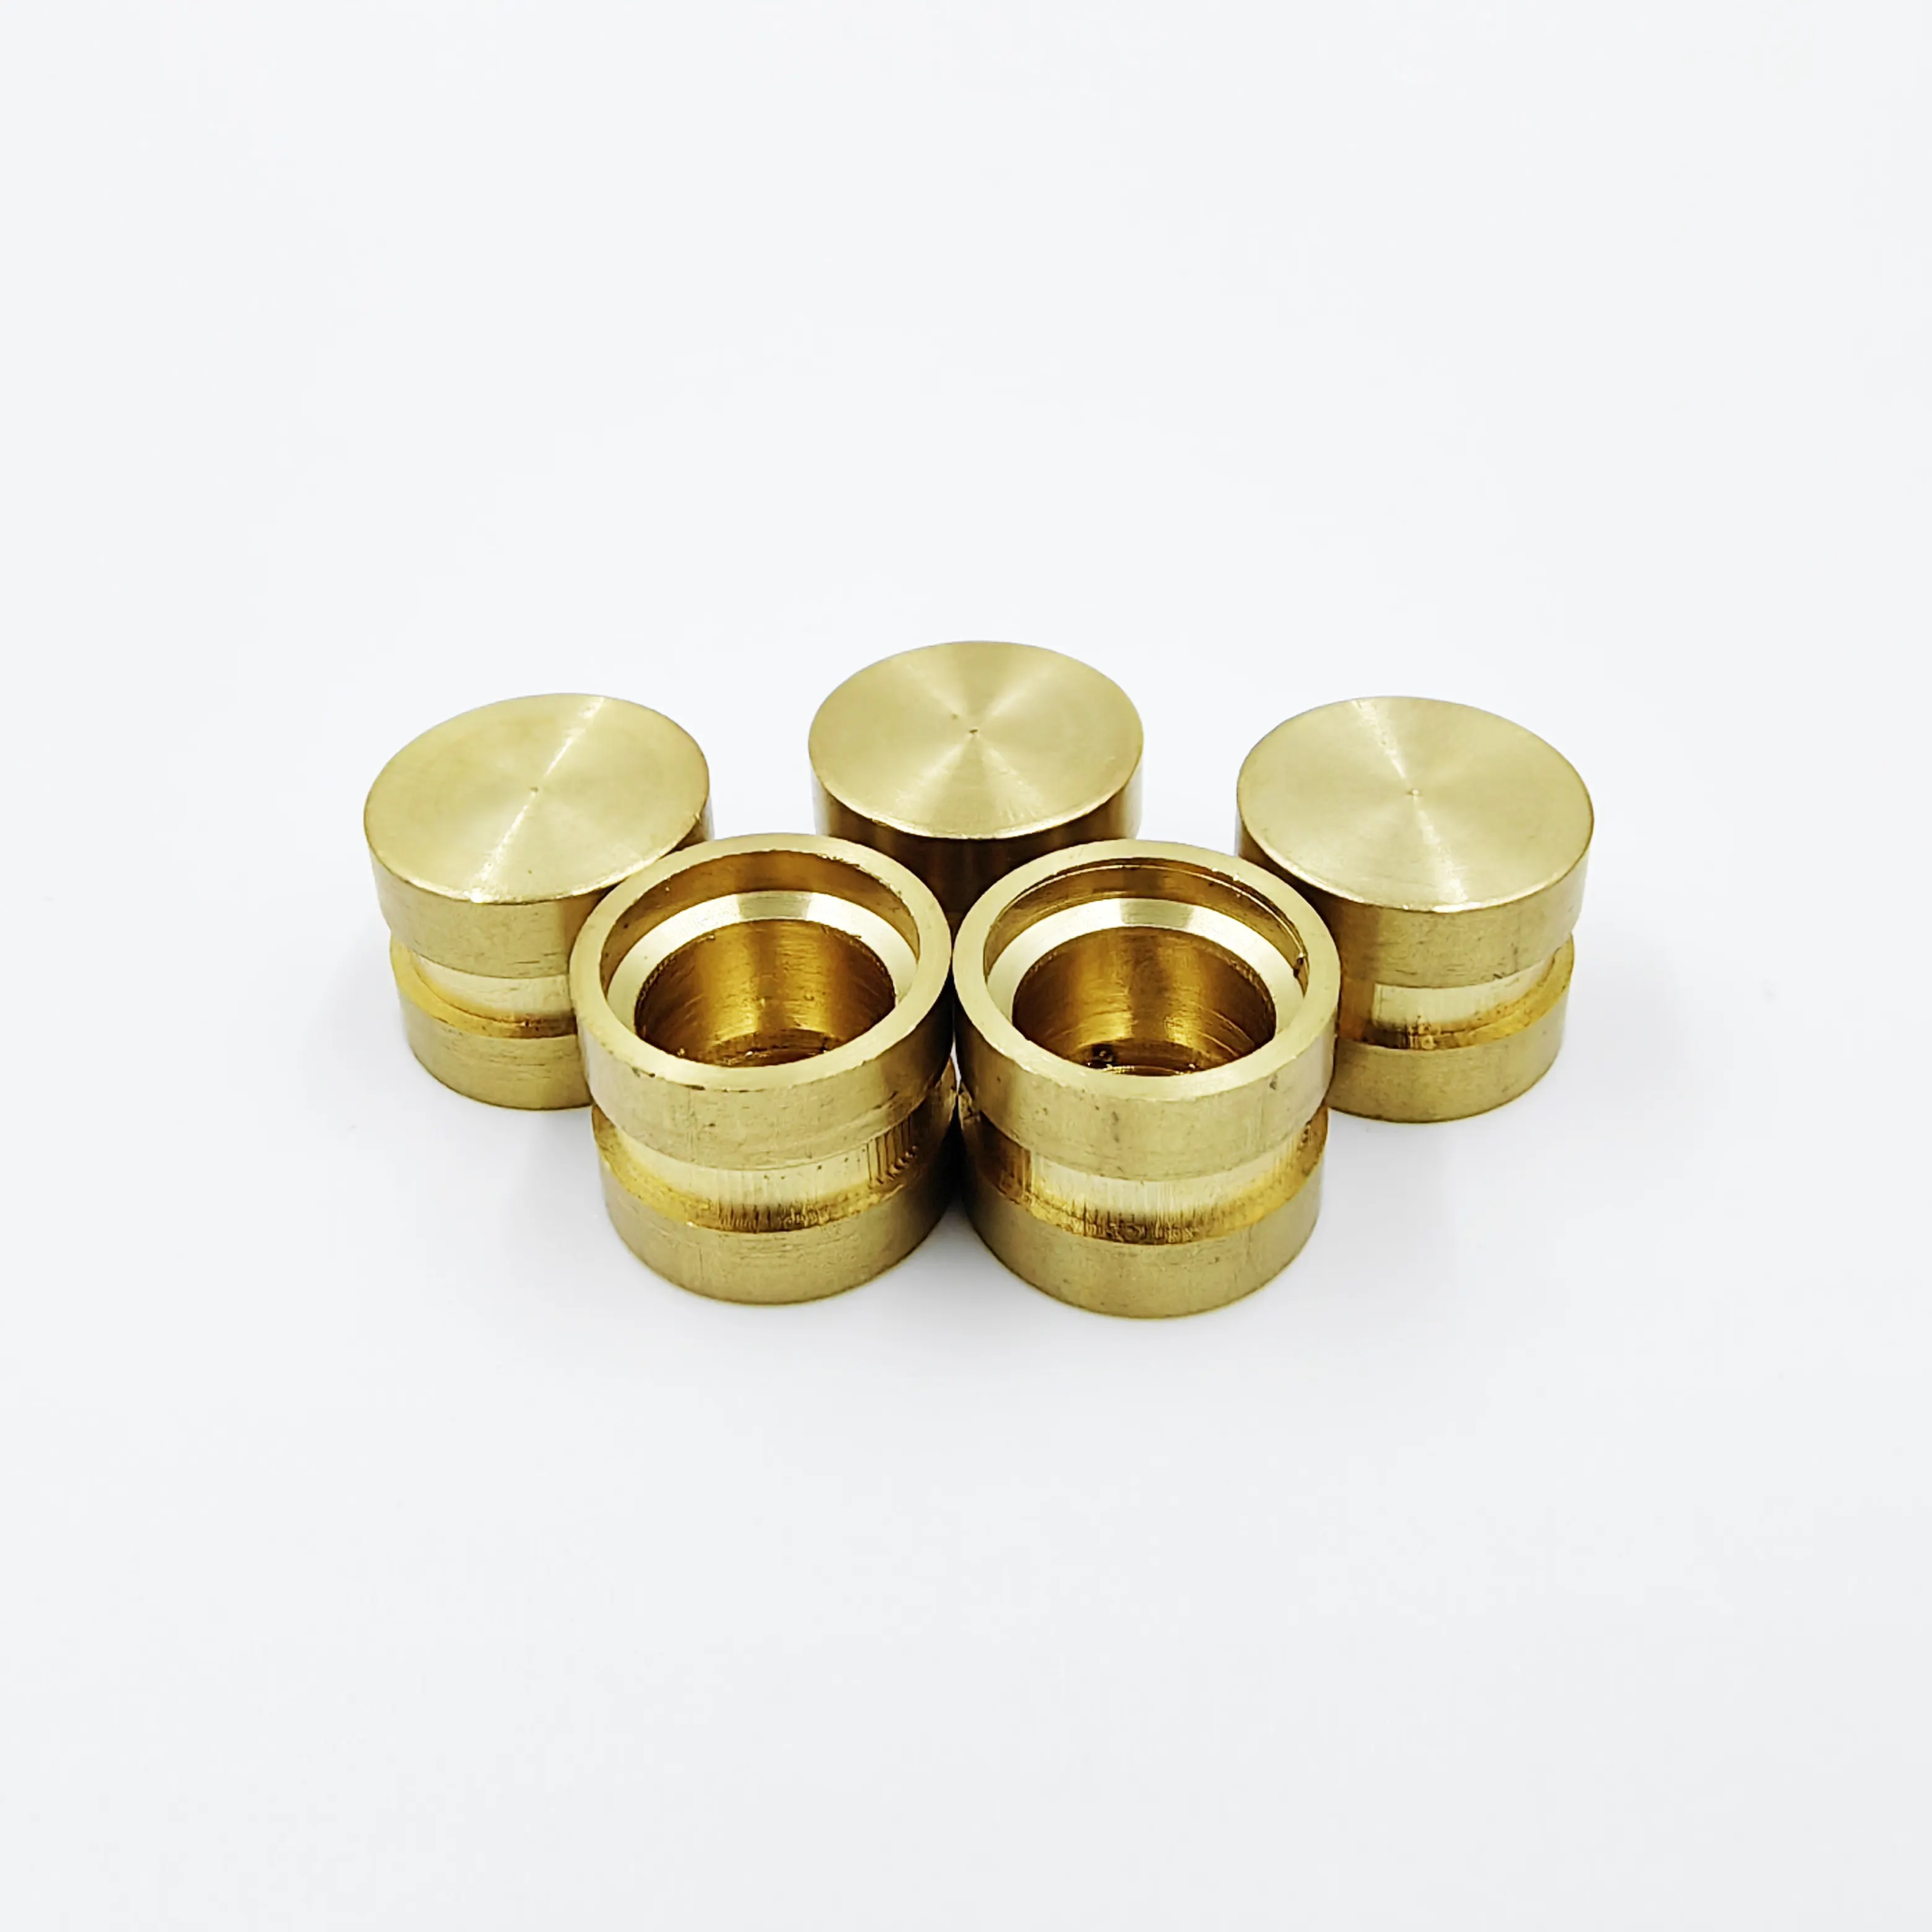 OEM ODM Brass Copper Steel Bronze Hardened Metals Parts with CNC Machining Anodizing Electroplating Painting Services